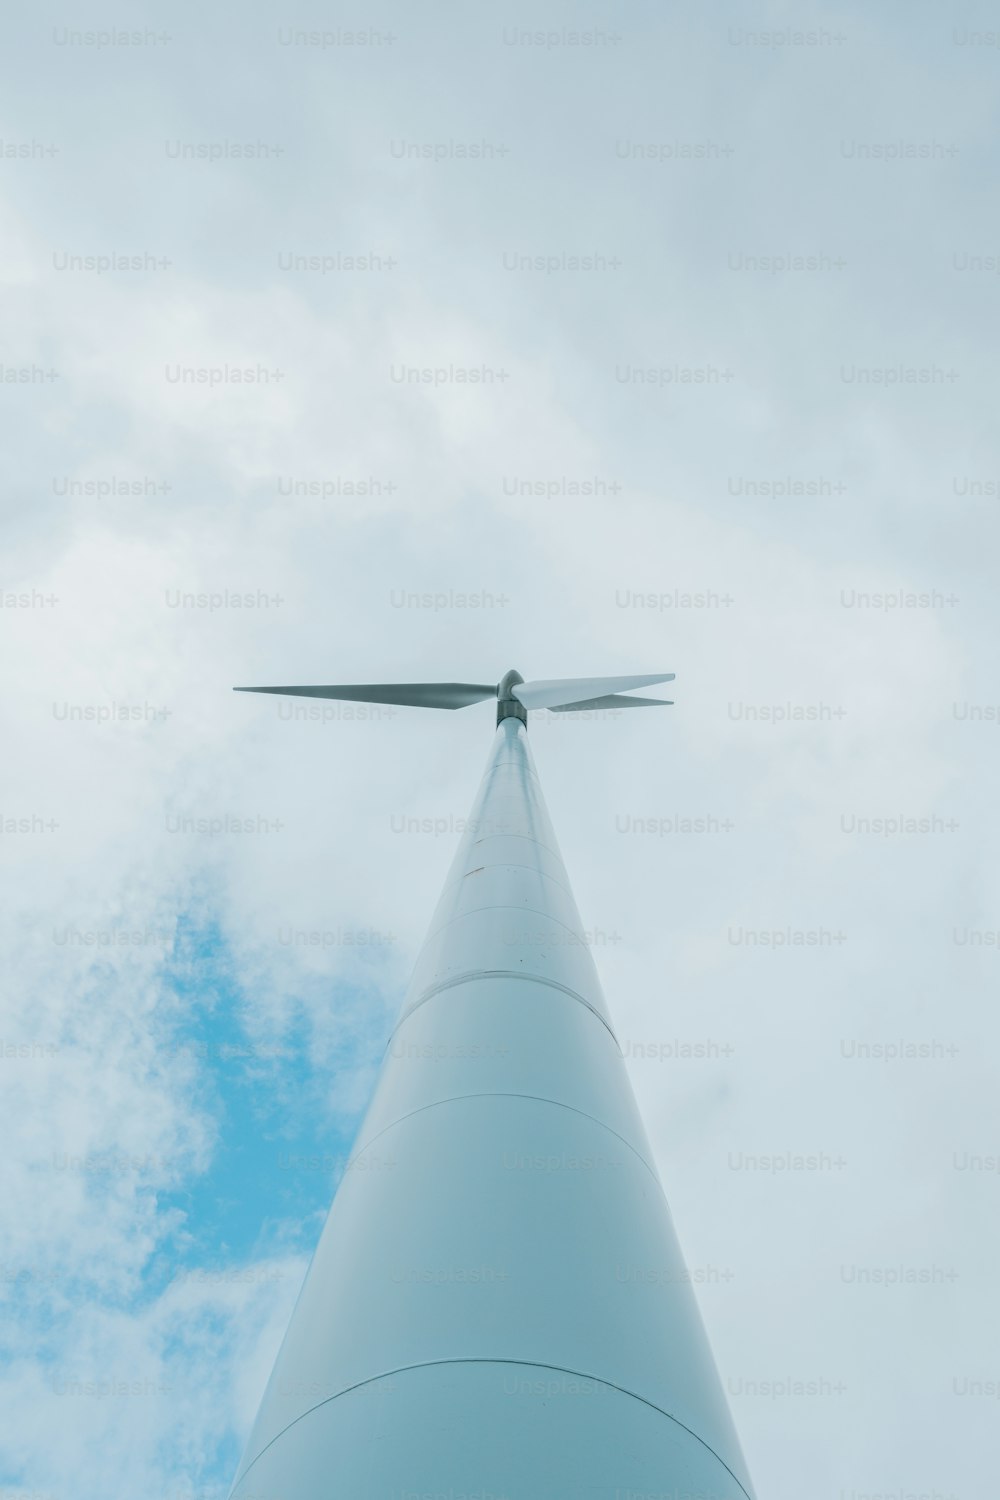 a view of the top of a wind turbine